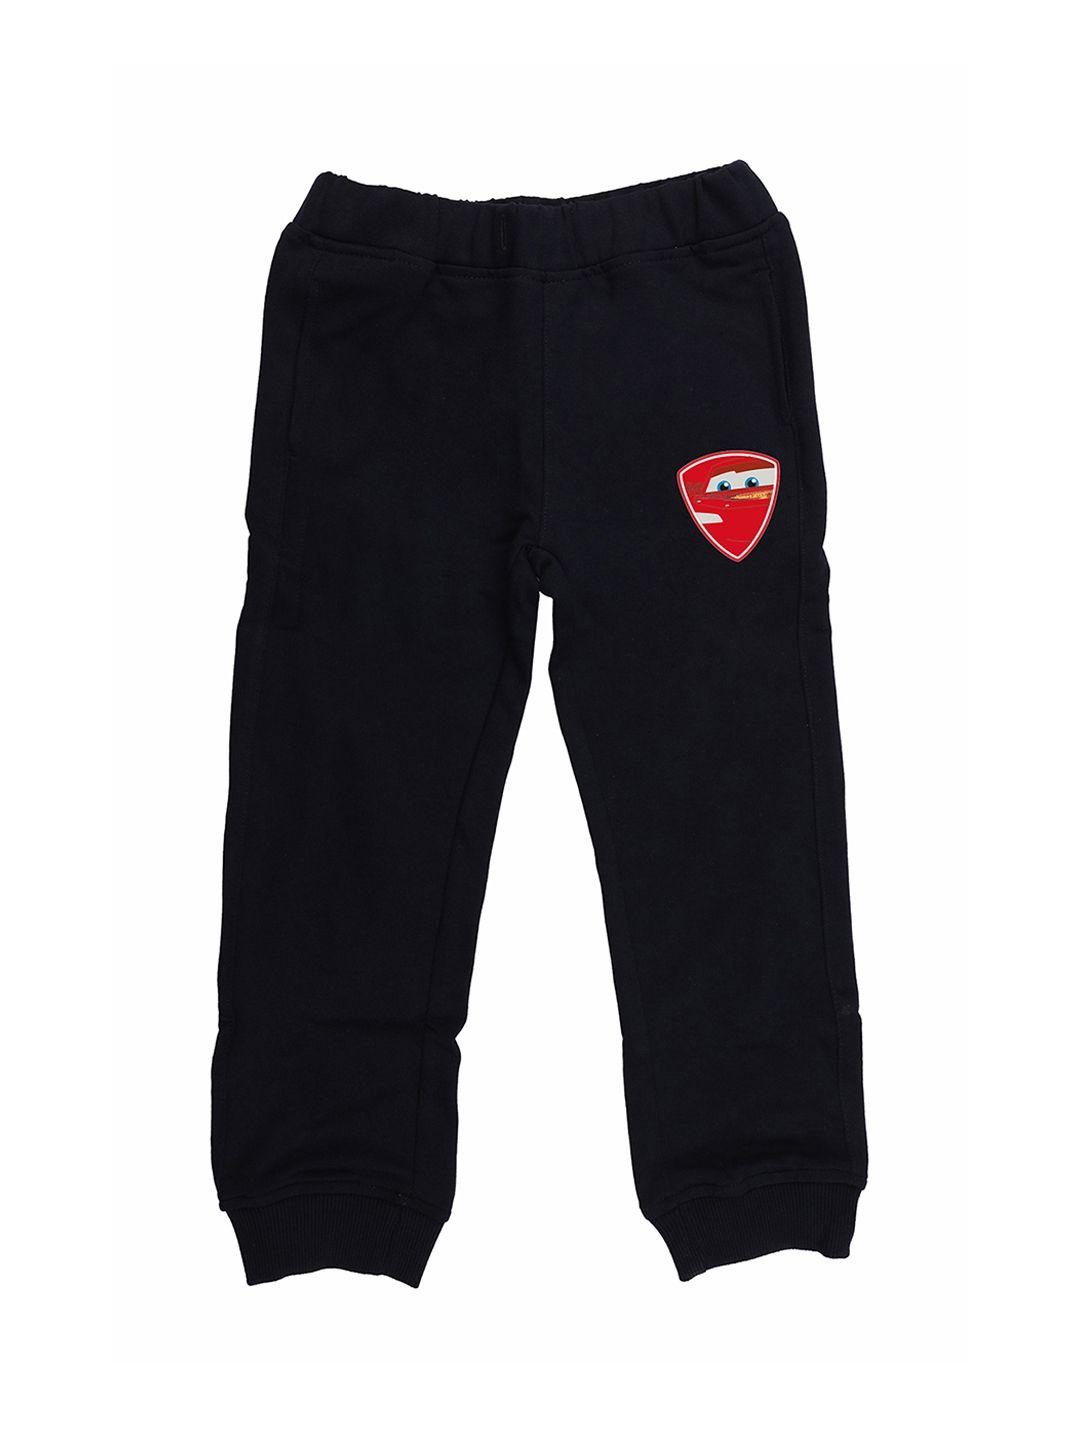 disney by wear your mind kids black solid joggers